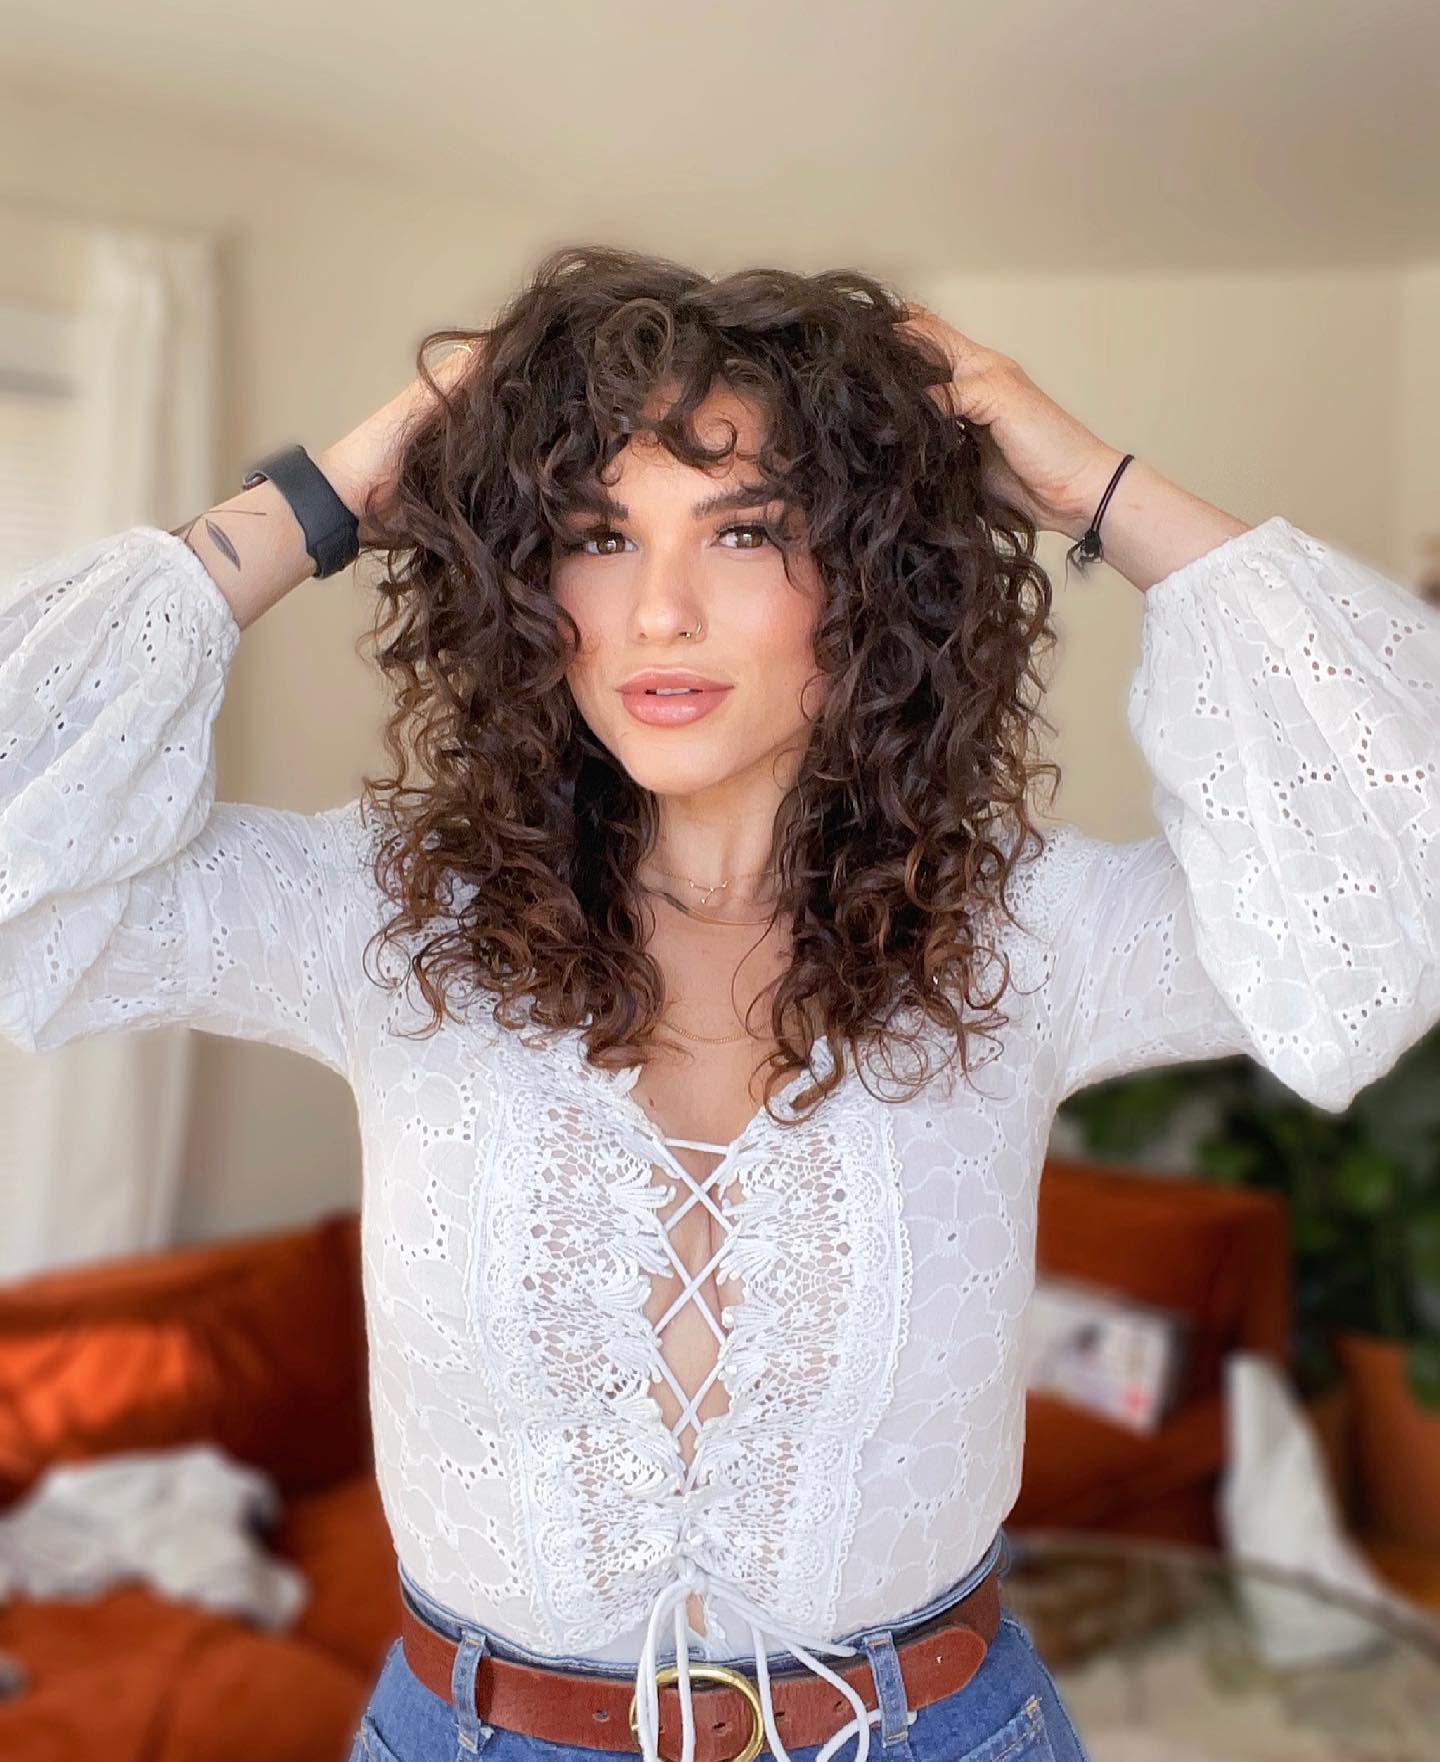 Curly Shag Hairstyle 14 Curly hair shaggy bob | Curly shag mullet | Medium length curly shags Curly Shag Hairstyles for Women